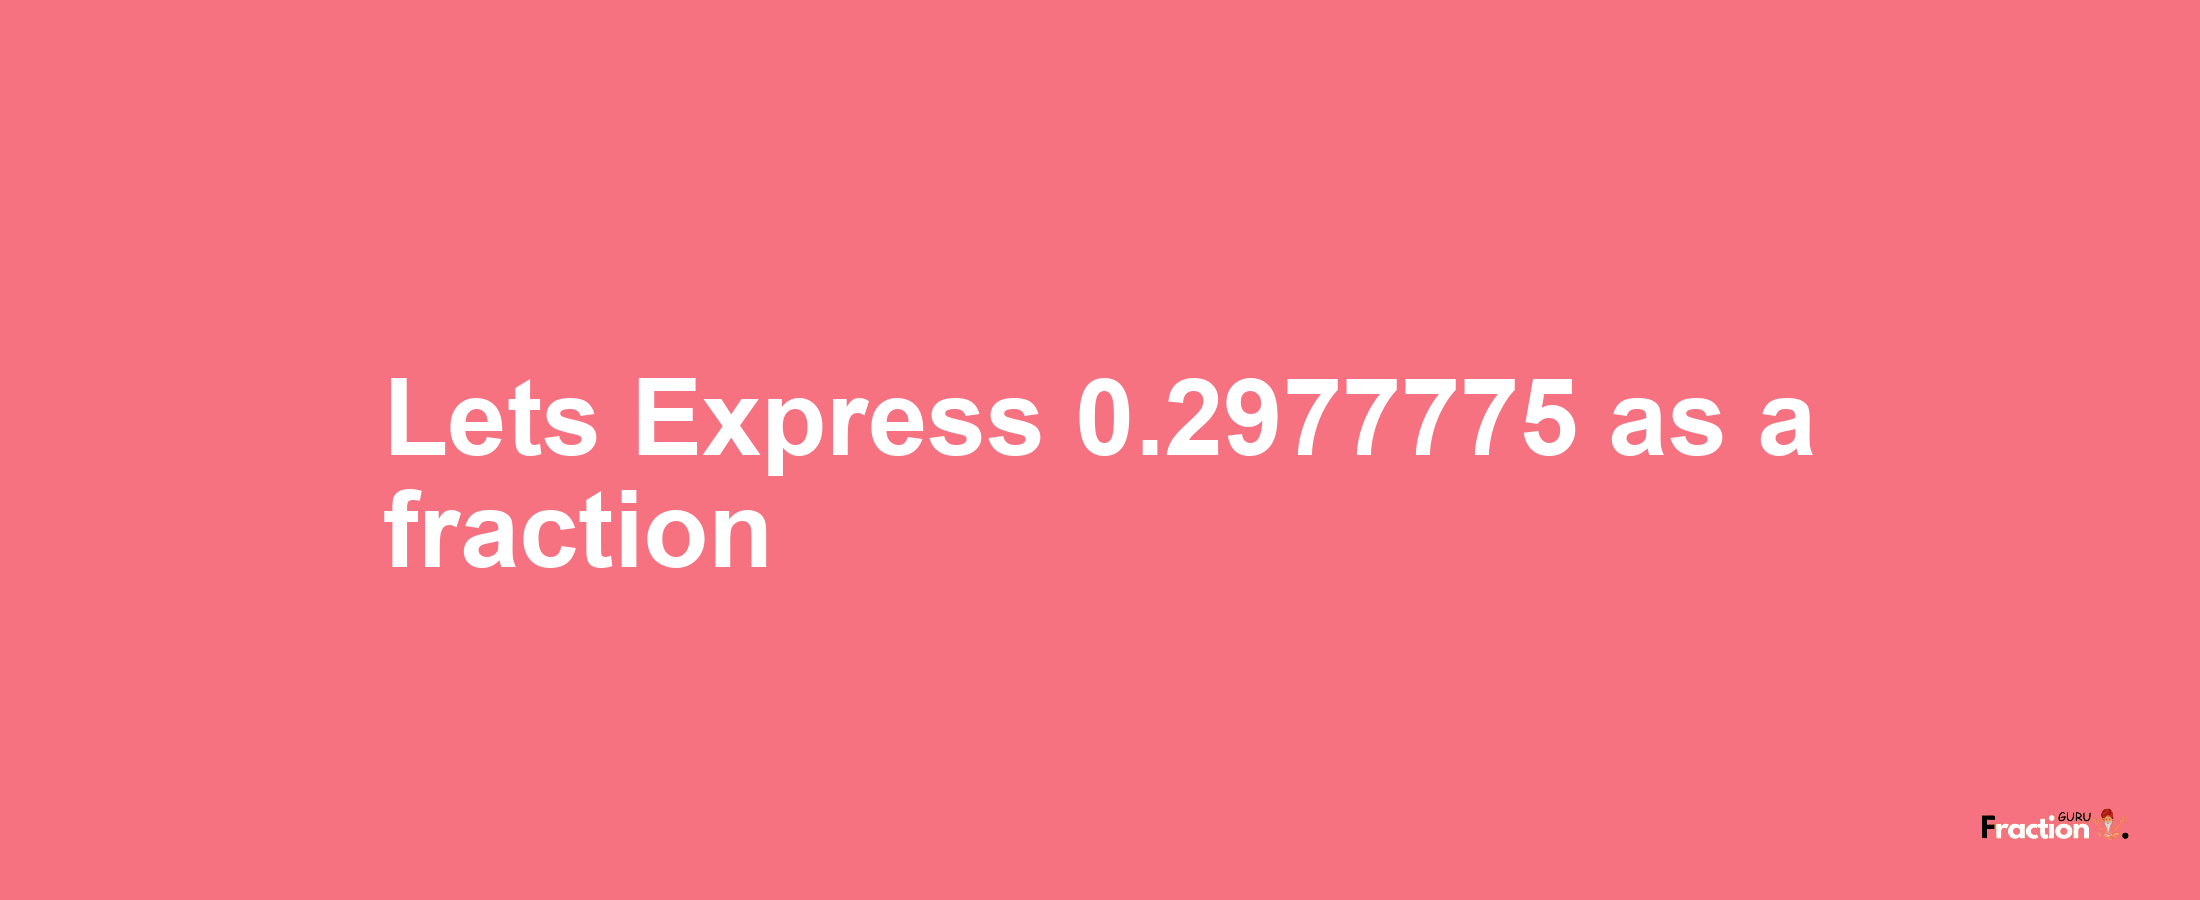 Lets Express 0.2977775 as afraction